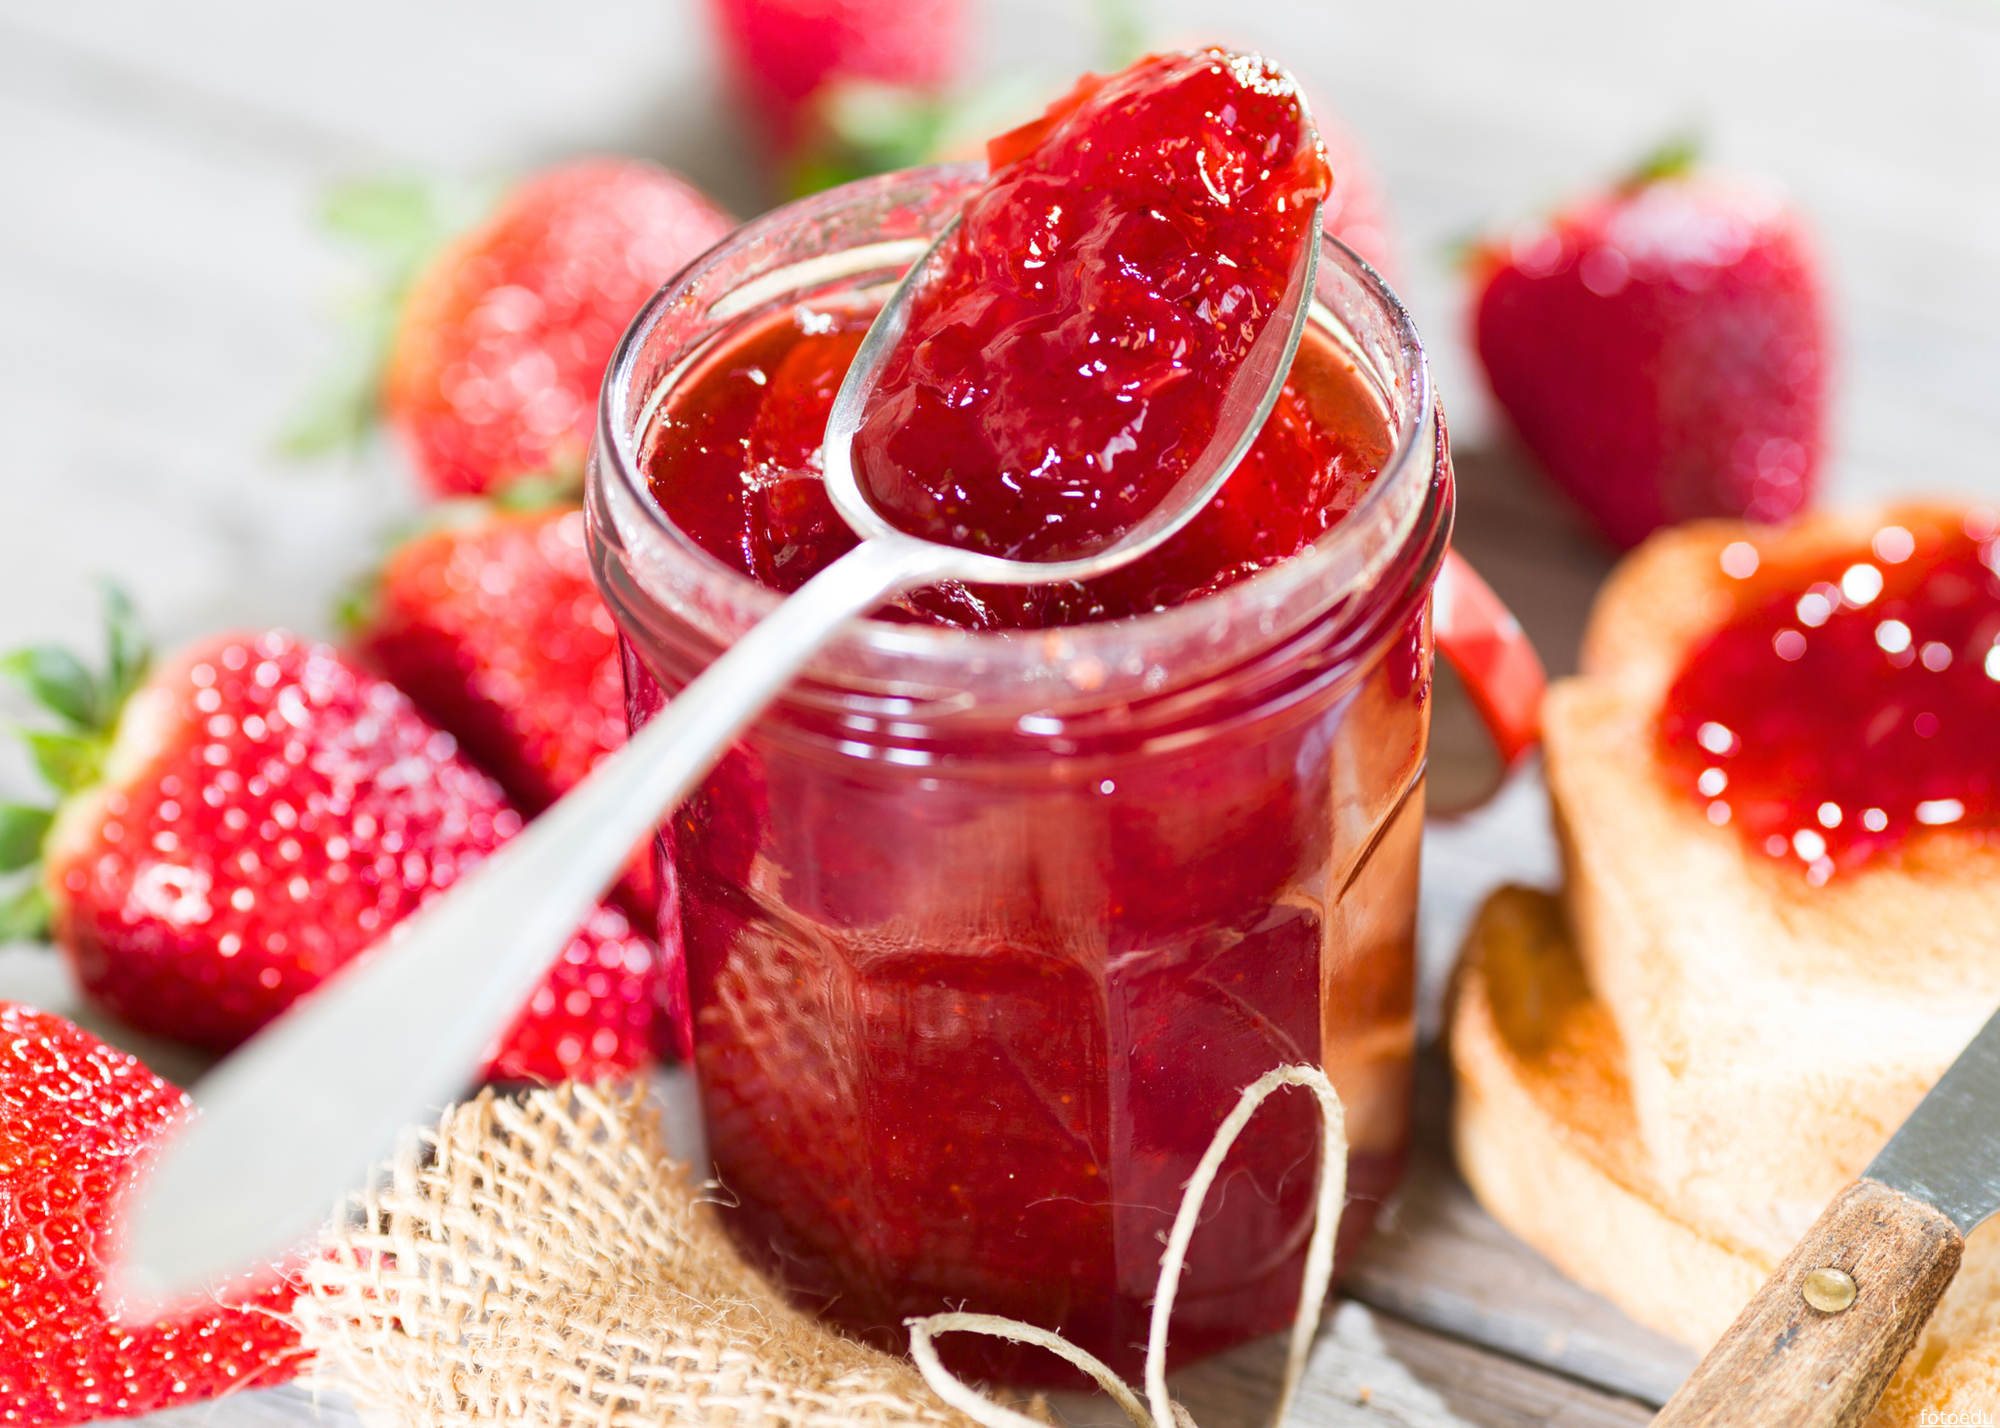 Homemade Canned Strawberry Jam: Recipe For Pink Sure-Jell Less Sugar Box